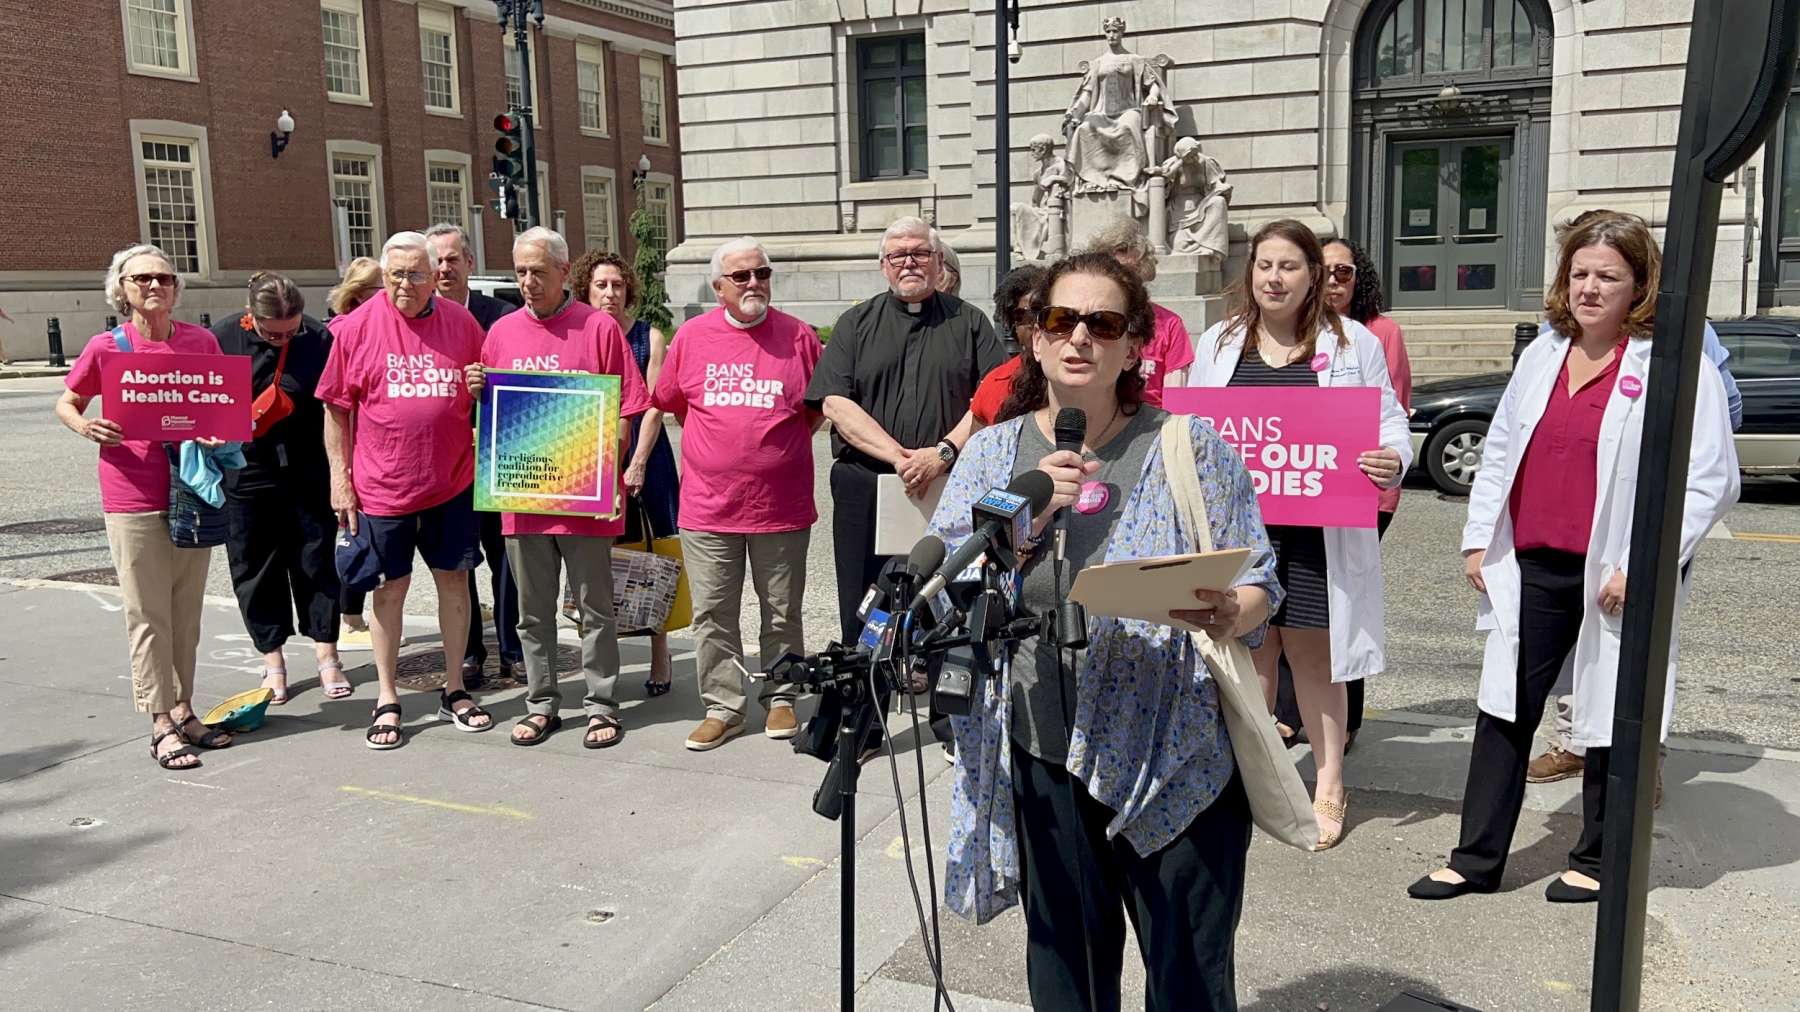 “We are outraged, and we are horrified,” says RI Coalition for Reproductive Freedom in response to Roe reversal